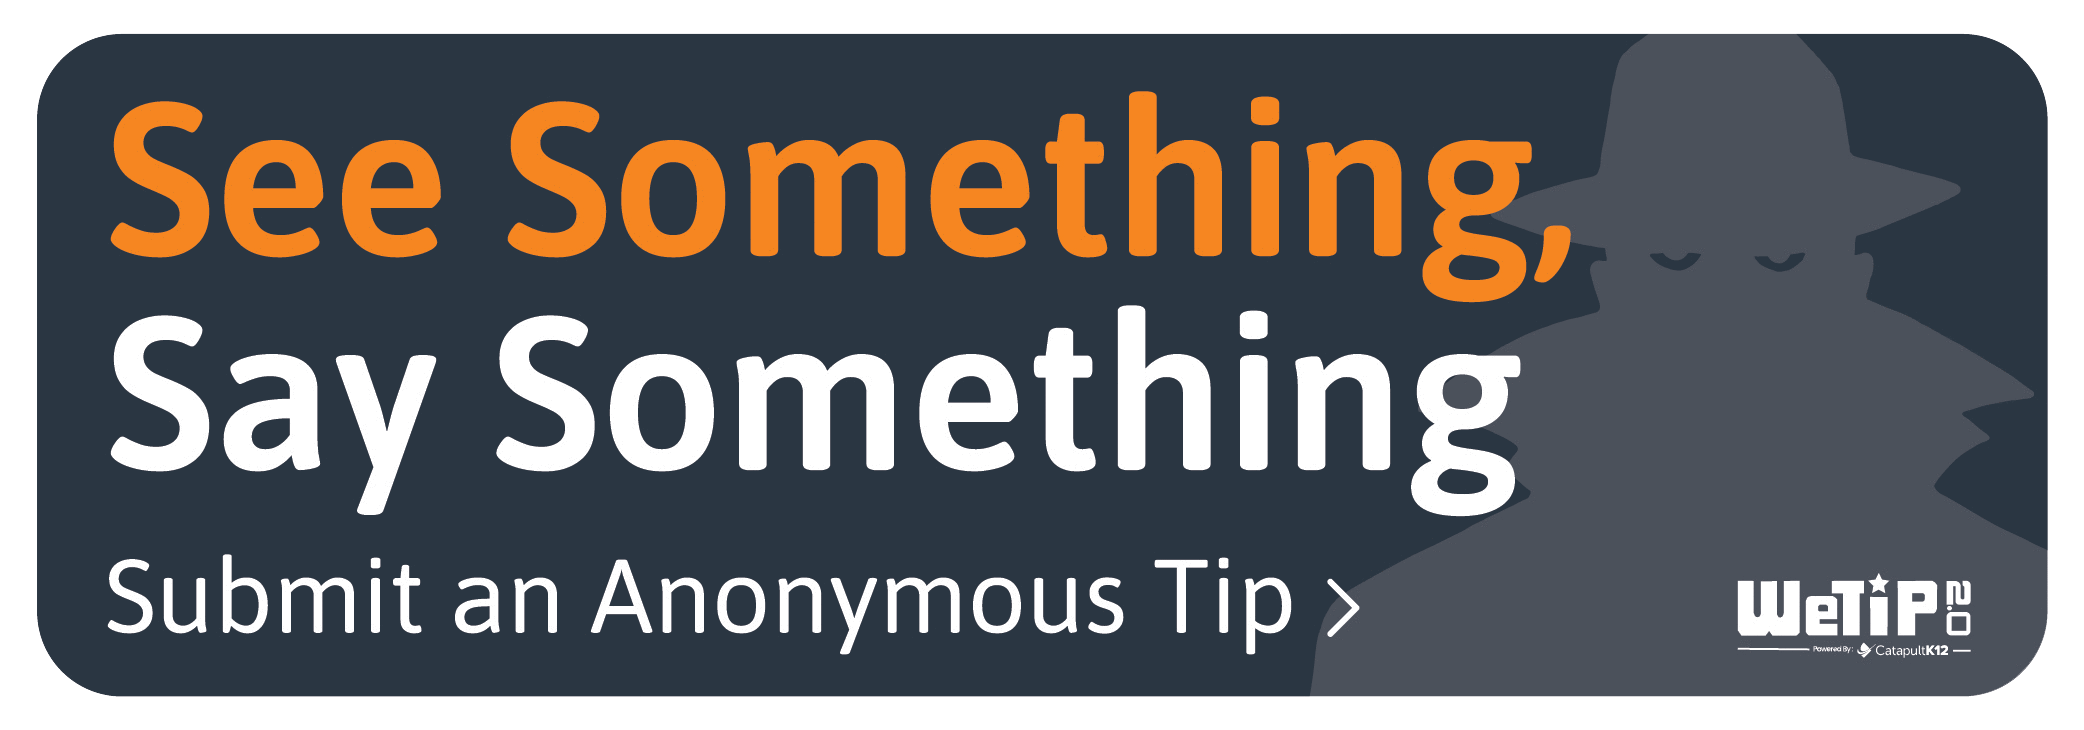 See Something, Say Something. Submit an anonymous Tip.